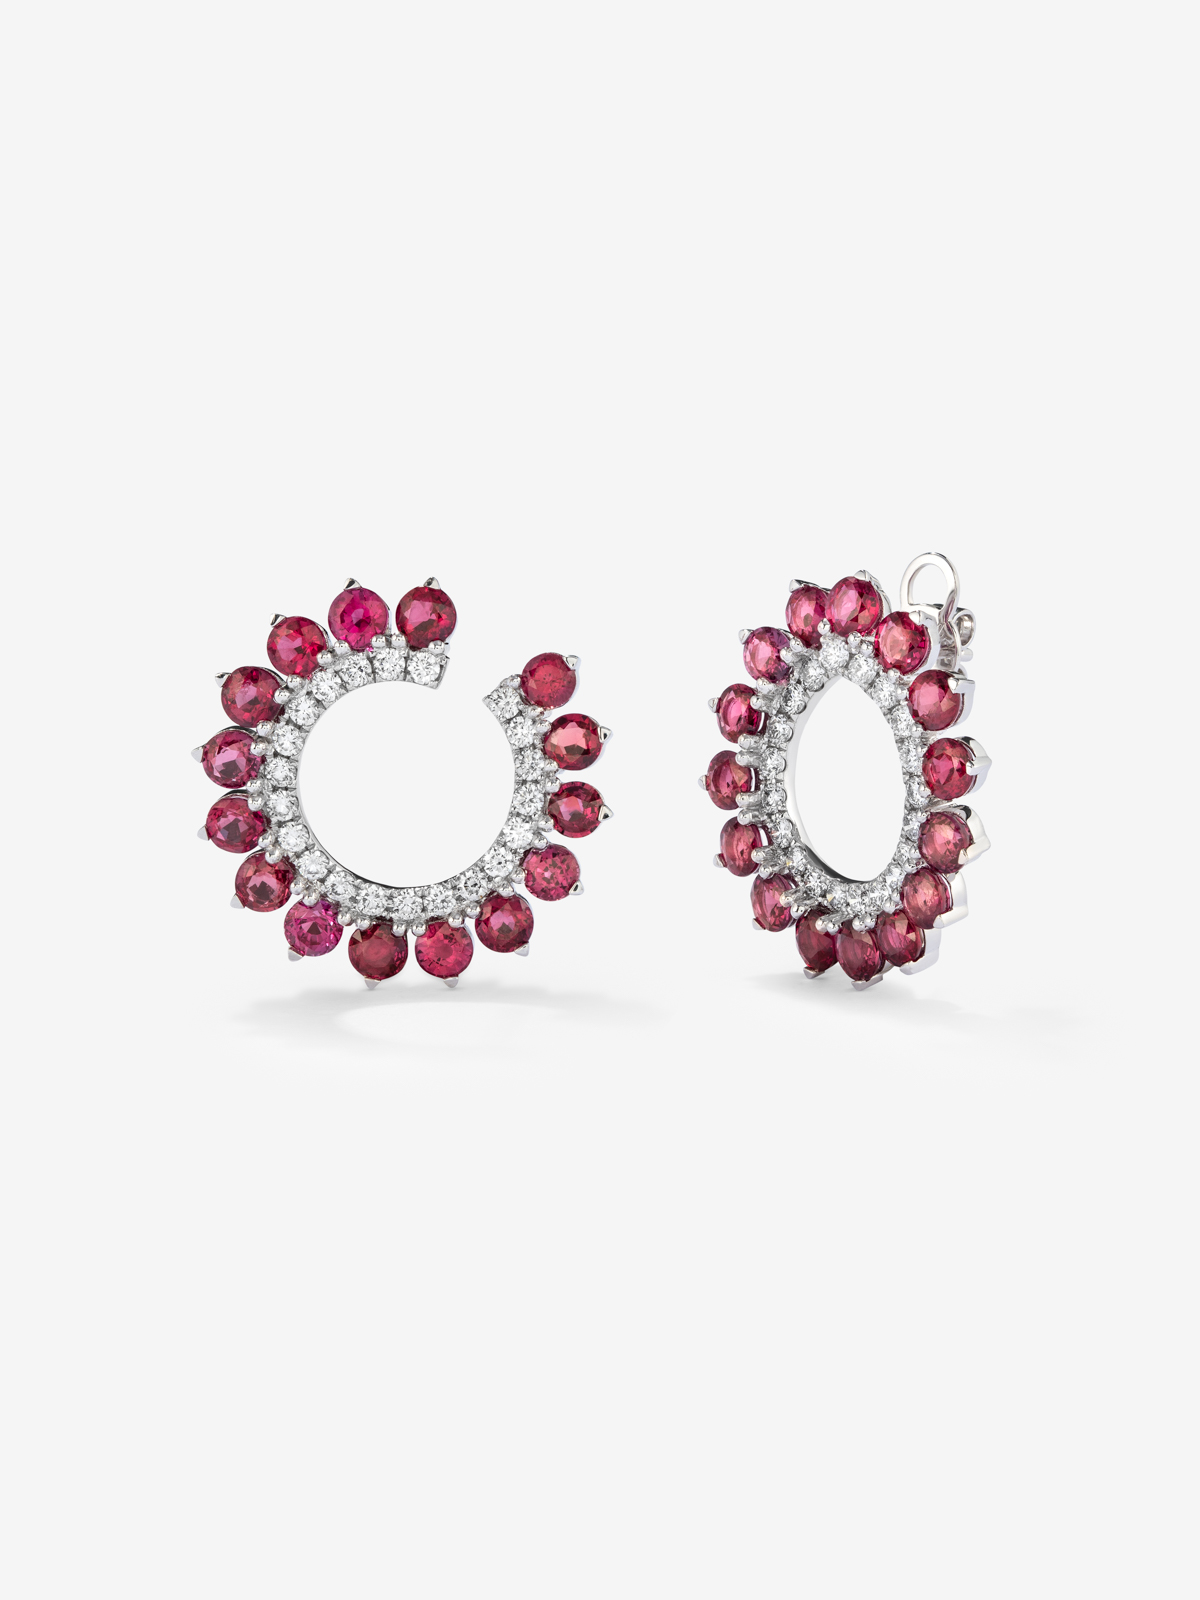 18K White Gold Aro Earrings with Red Rubyes in Blind Size 6.52 cts and White Diamonds in Bright Size of 1 CTS